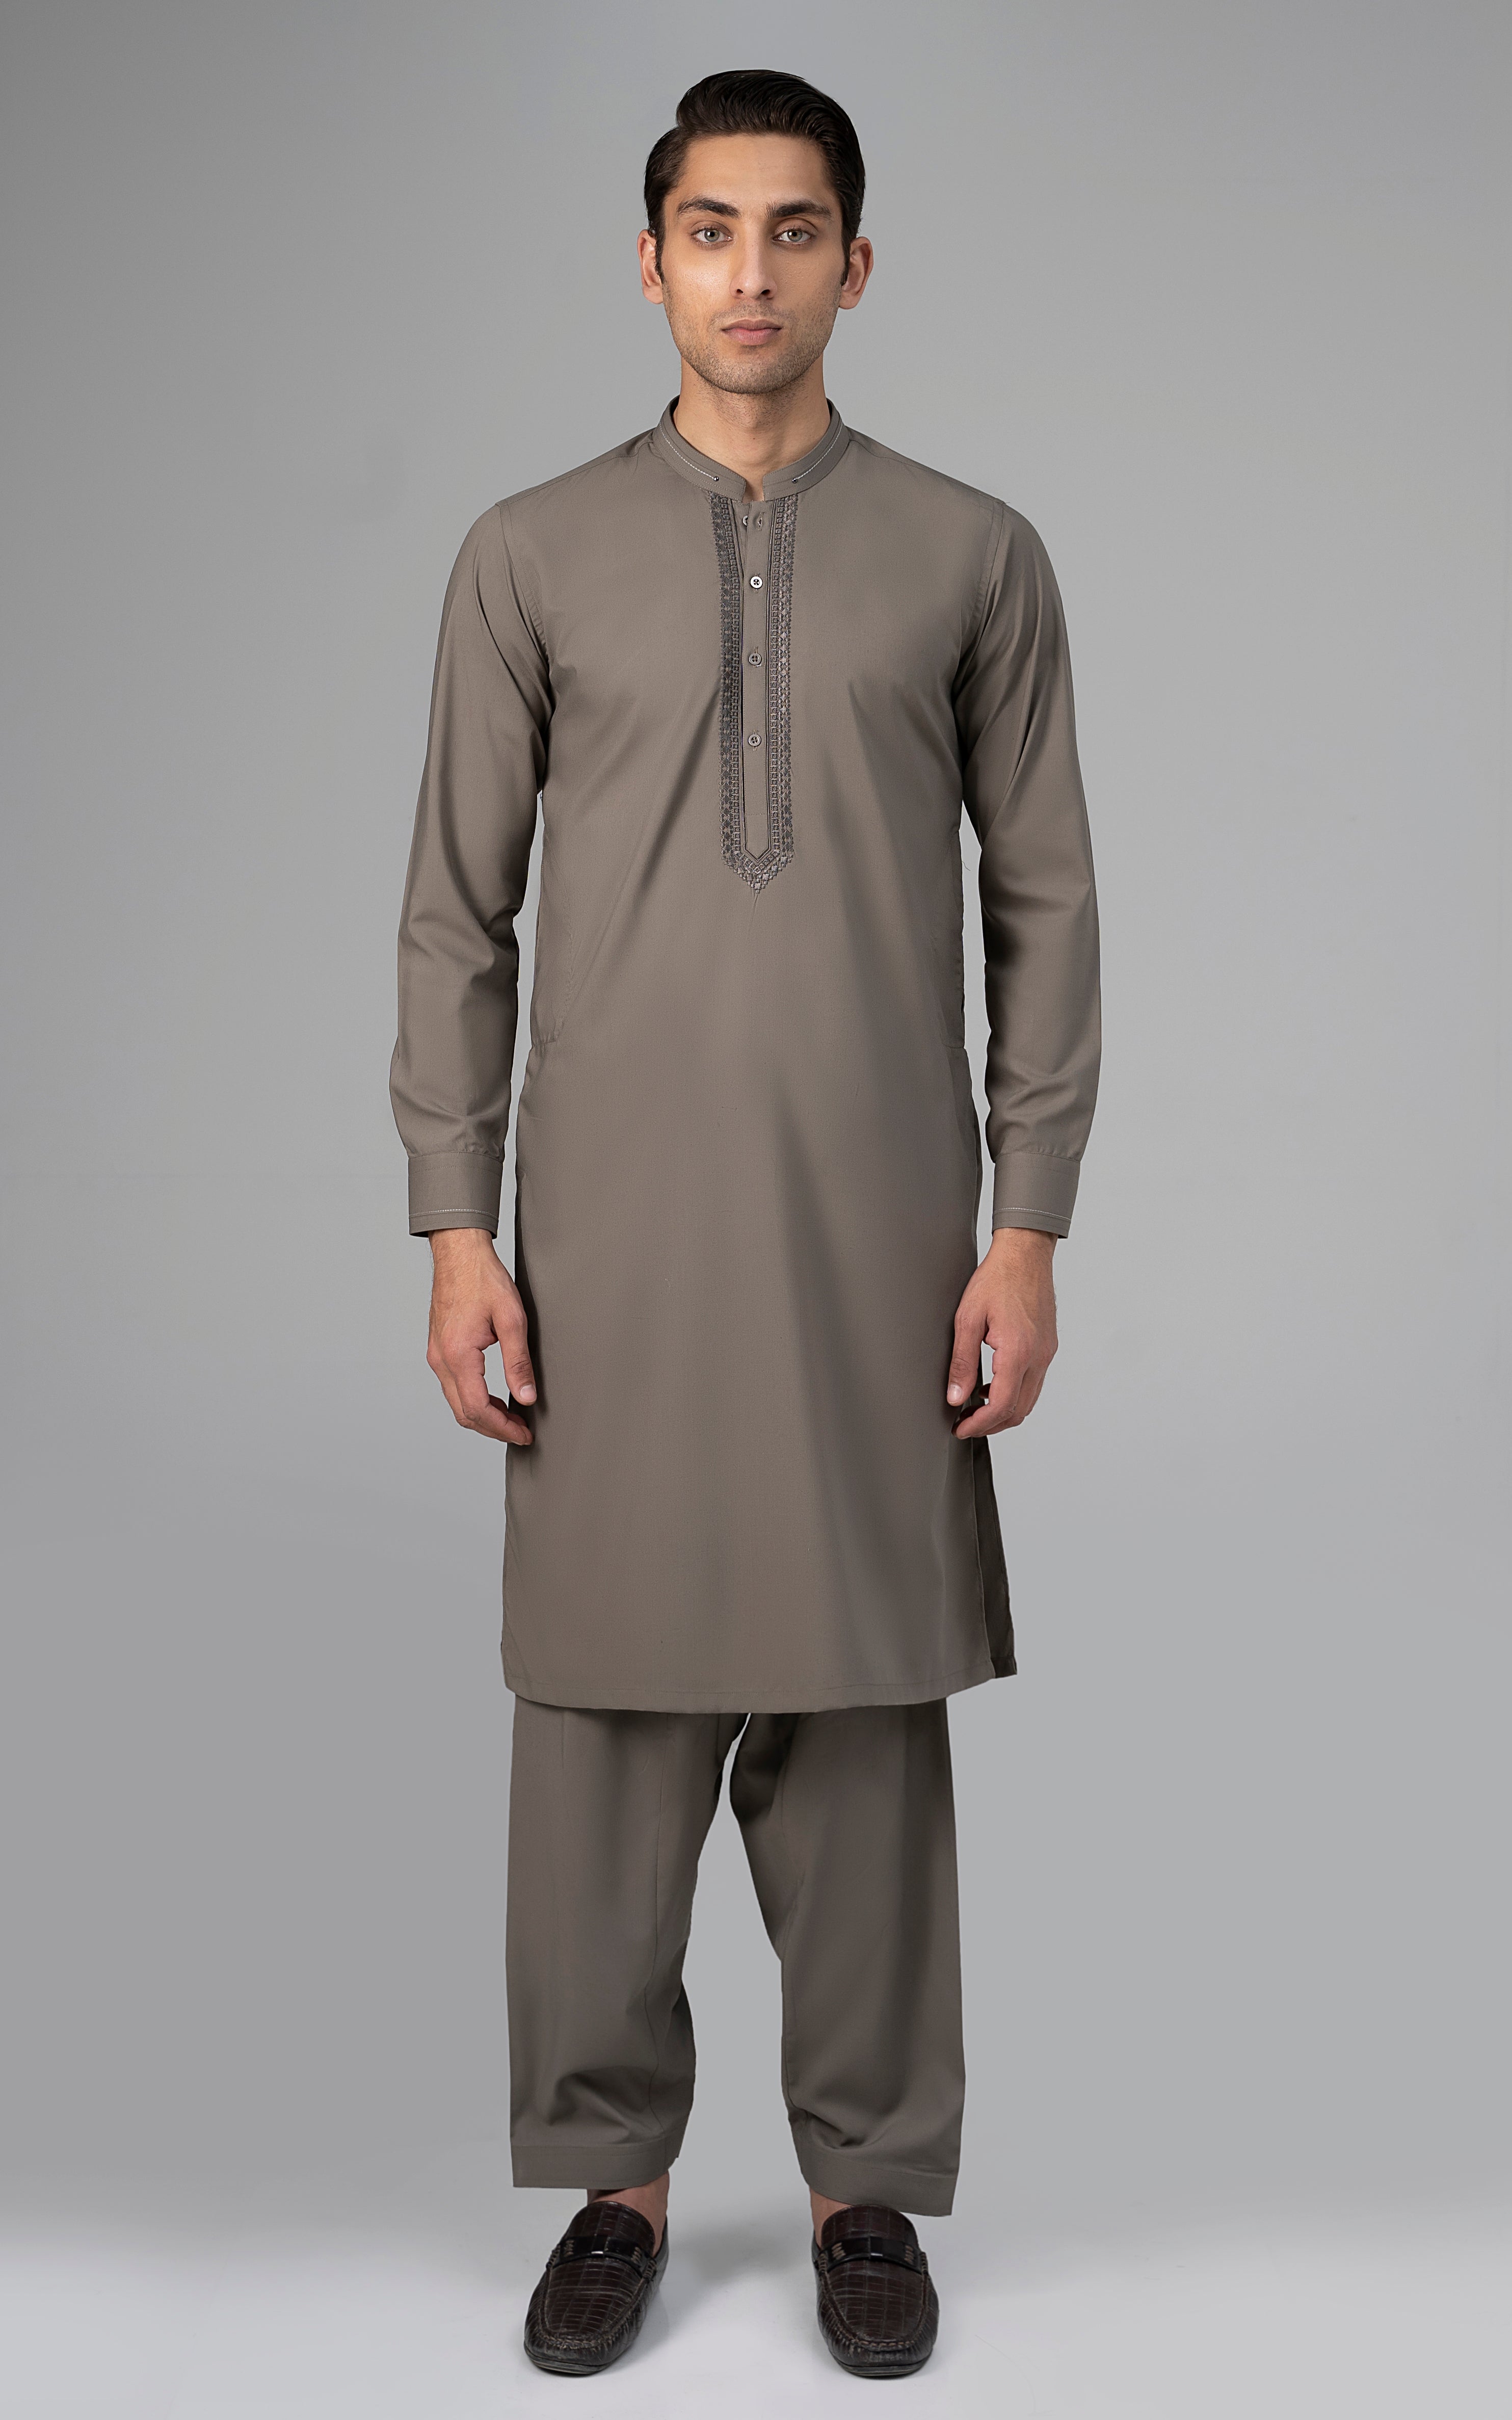 EMBROIDERED WASH & WEAR - PREMIUM COLLECTION OLIVE GROVE